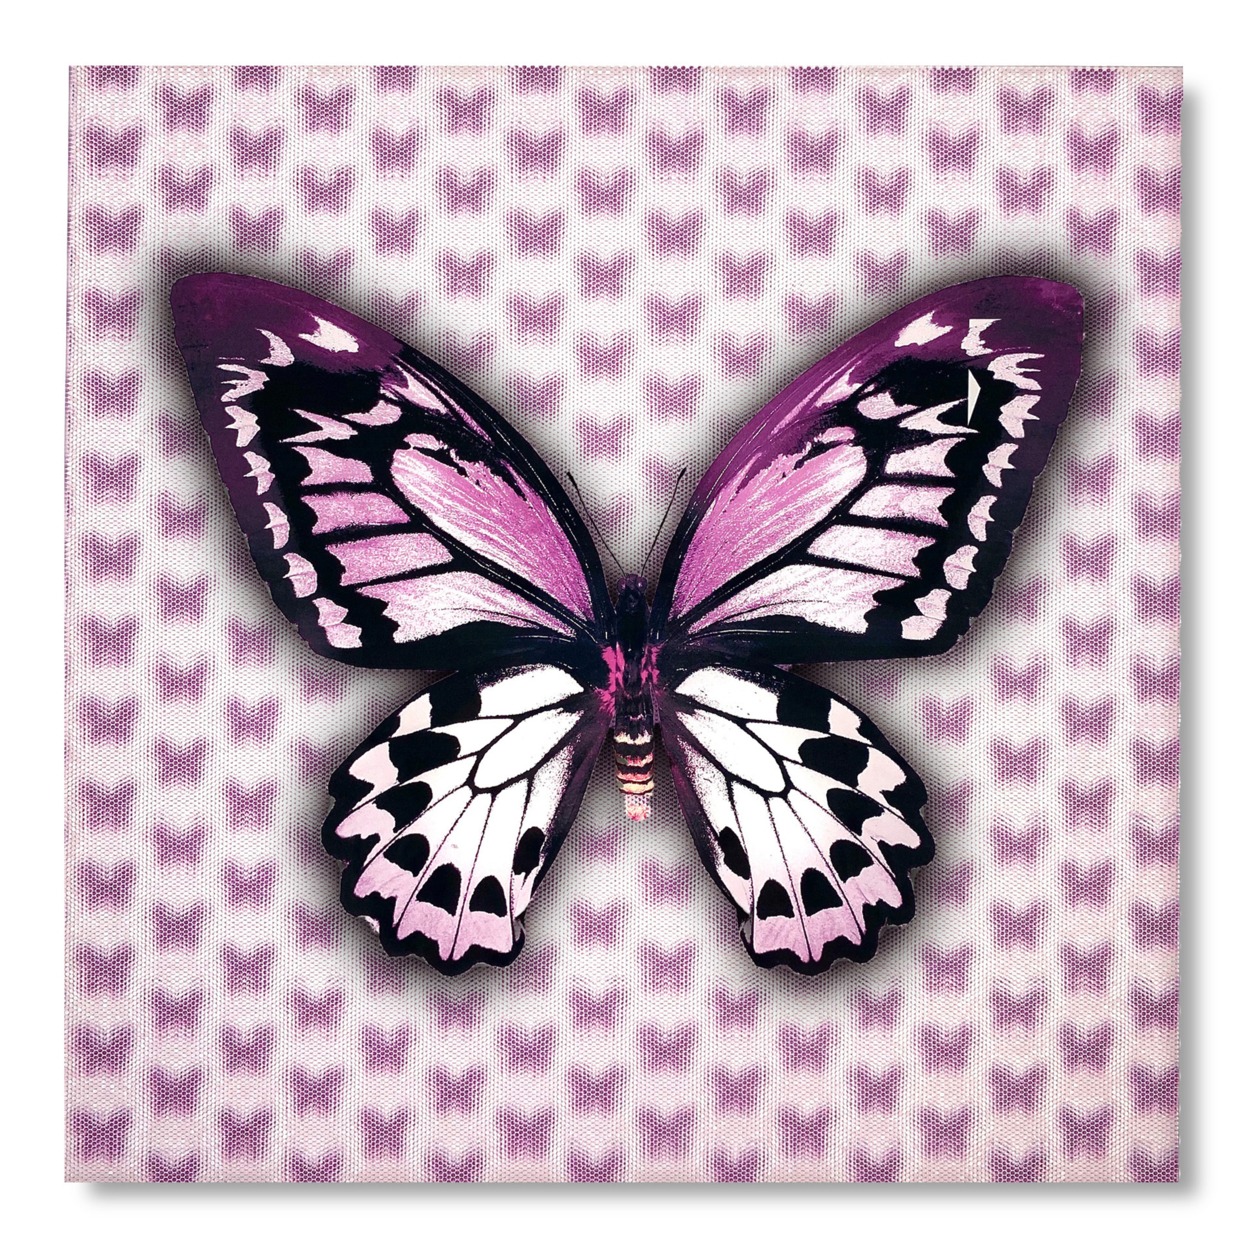 5D Multi-Dimensional Custom Made Purple Butterfly Wall Art Print On Strong Polycarbonate Panel - Lenticular Artwork By Matashi (12x12 Inch)